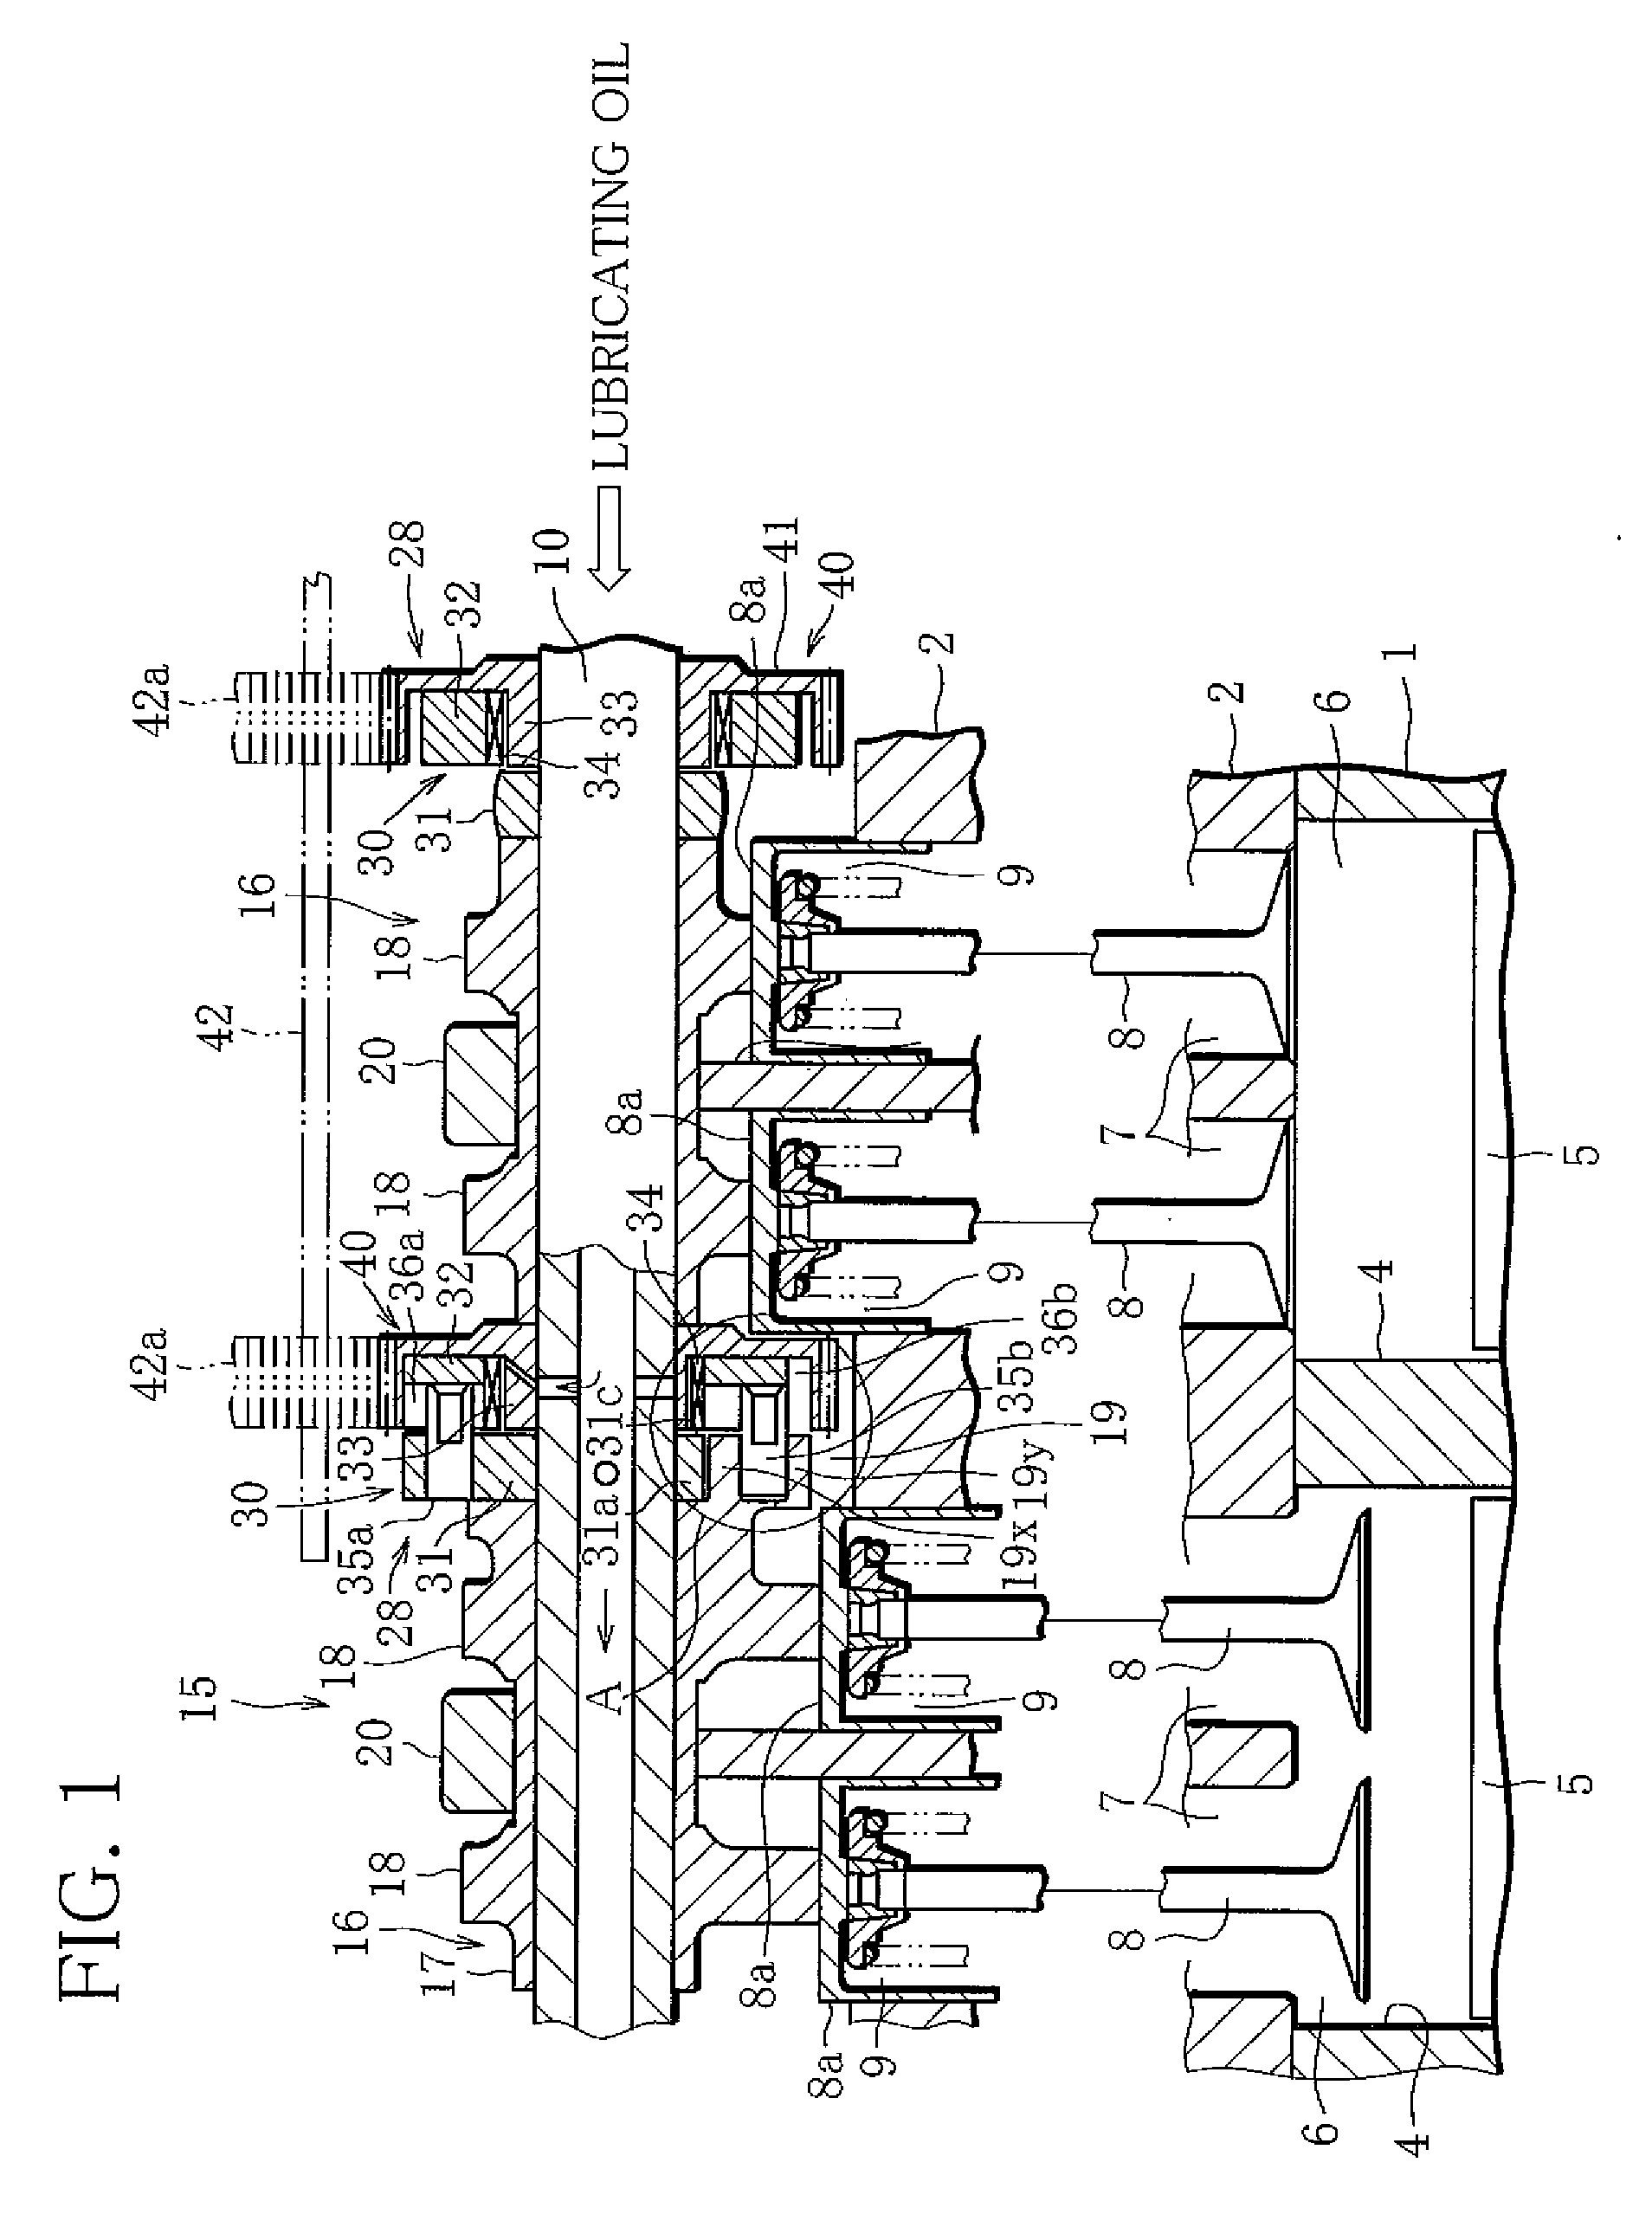 Variable valve gear for an internal combustion engine